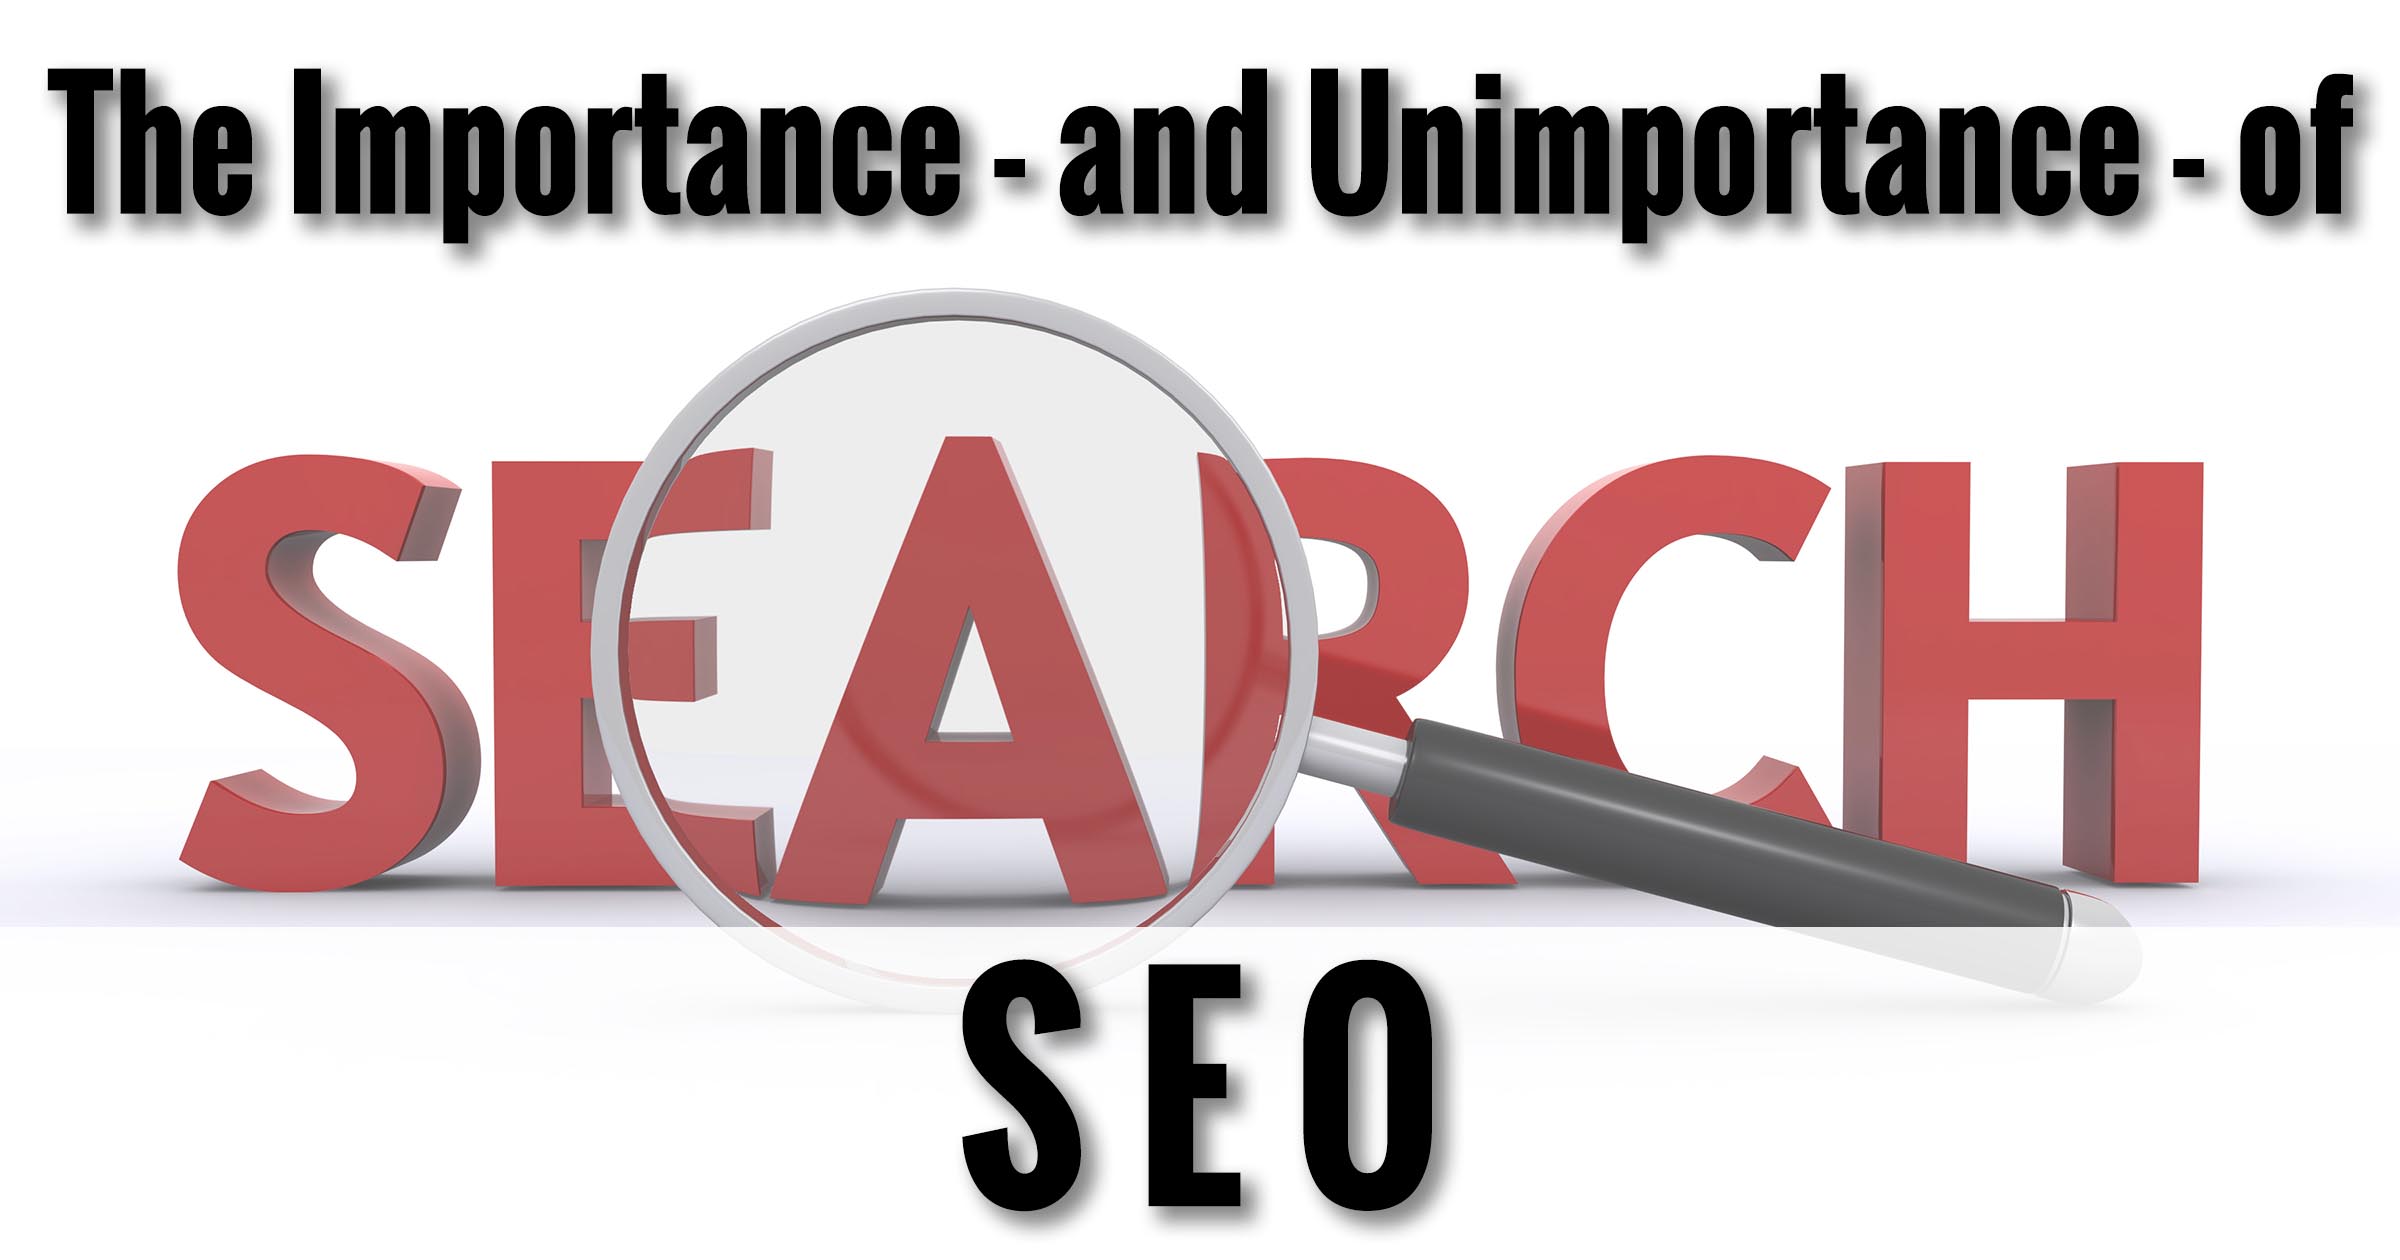 The Importance - and Unimportance - of SEO